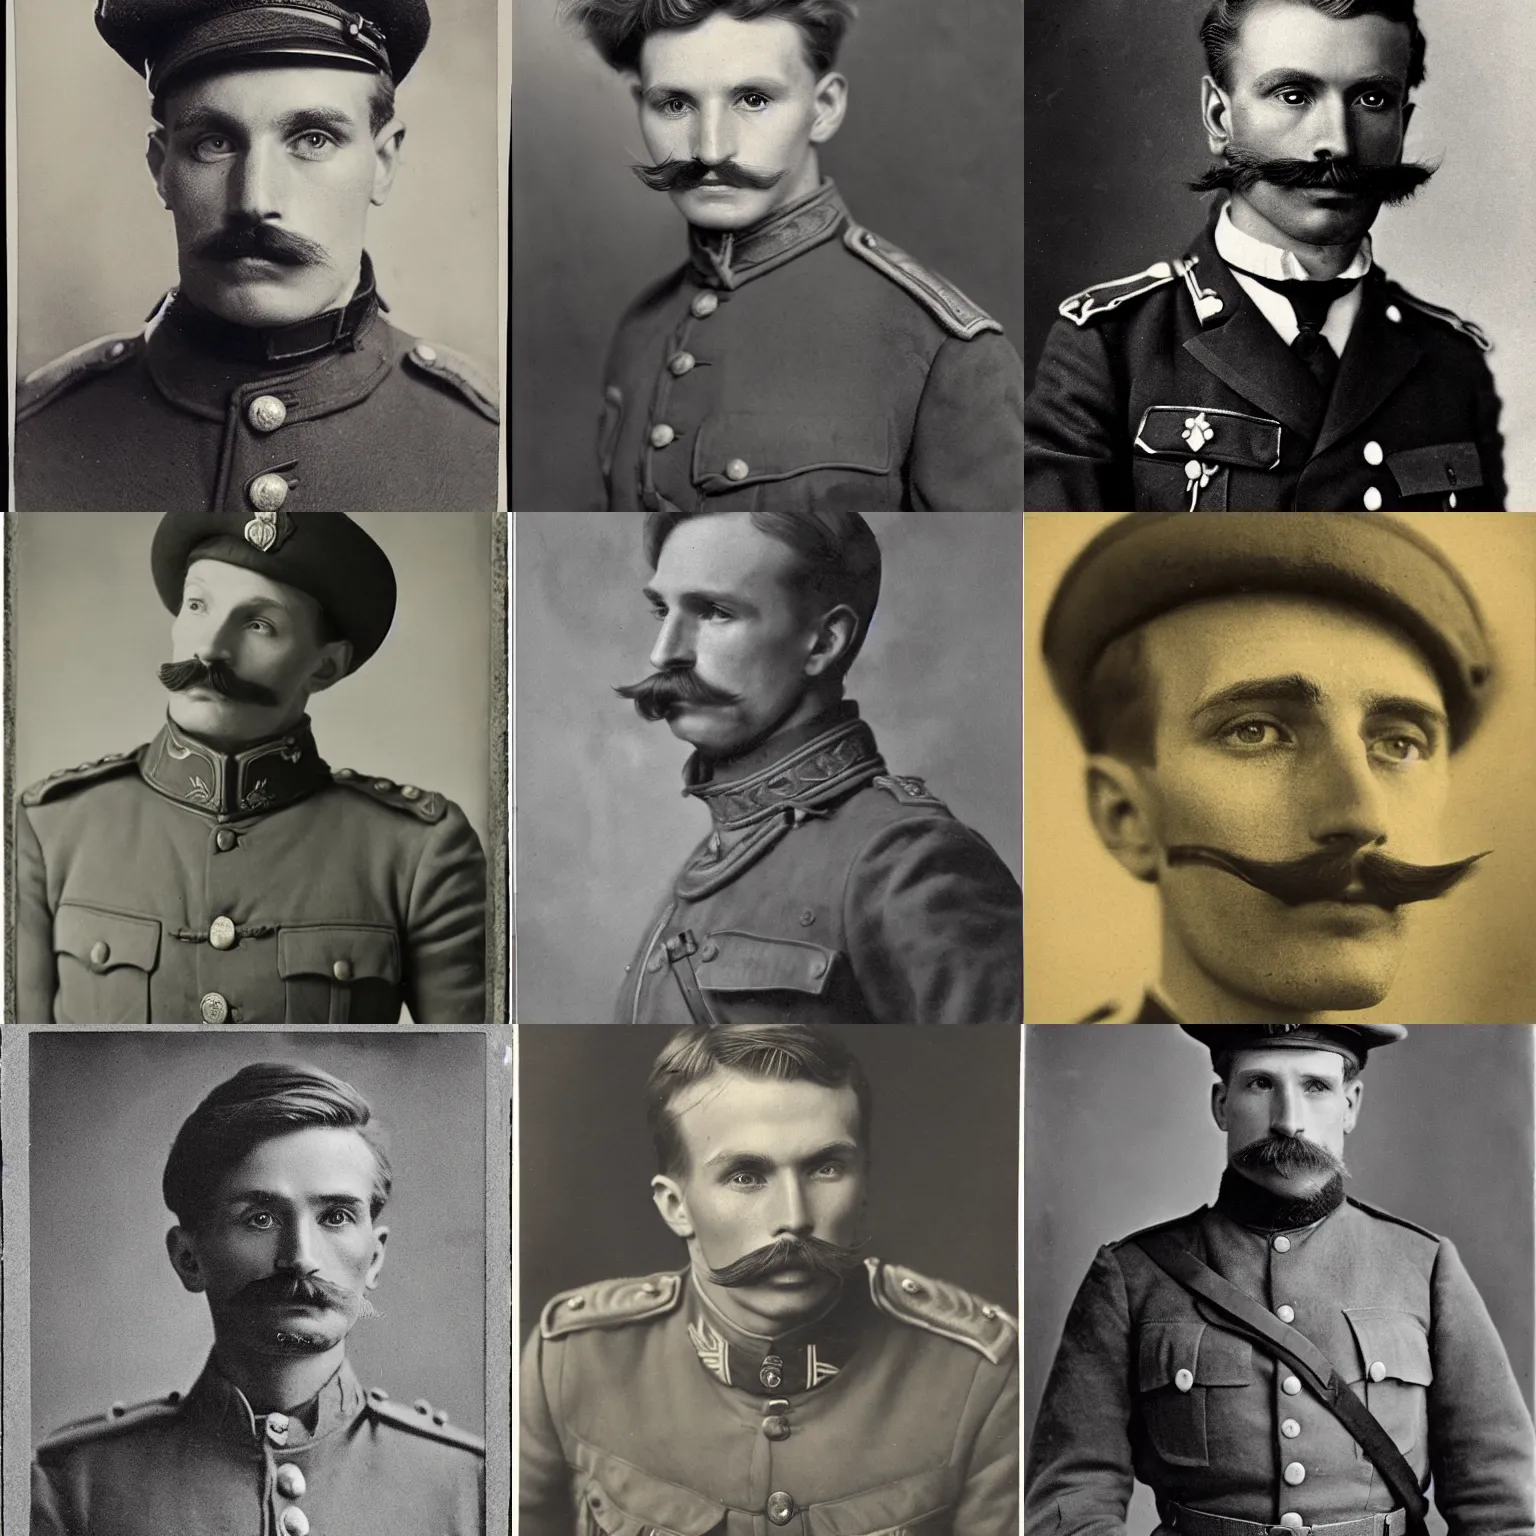 Prompt: late 1 9 th century, austro - hungarian!!! soldier ( handsome, 2 7 years old, redhead michał zebrowski with a small mustache ). old, detailed, hyperrealistic, 1 9 th century portait by munkacsi, yousuf karsh, and mednyanszky laszlo